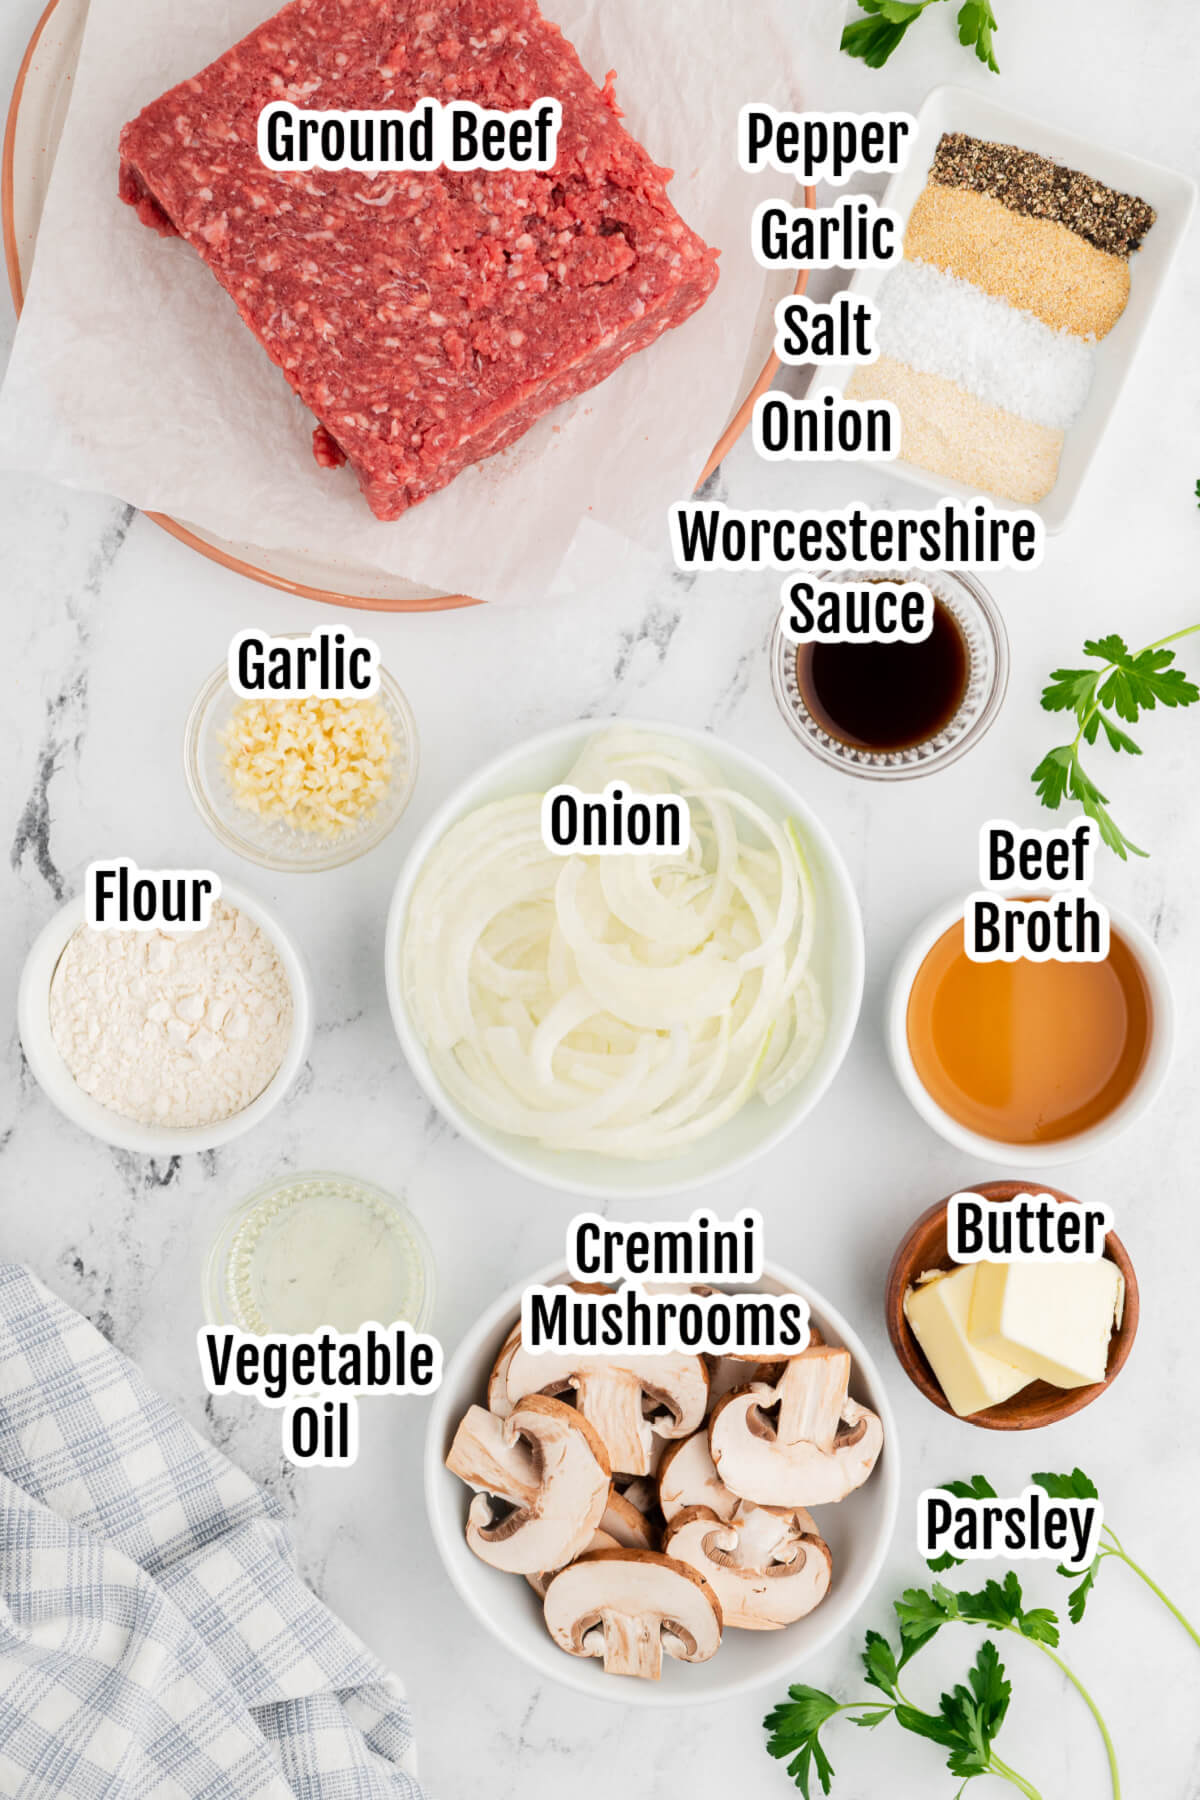 Image of the ingredients needed for Burger Steak Recipe with mushroom gravy. 